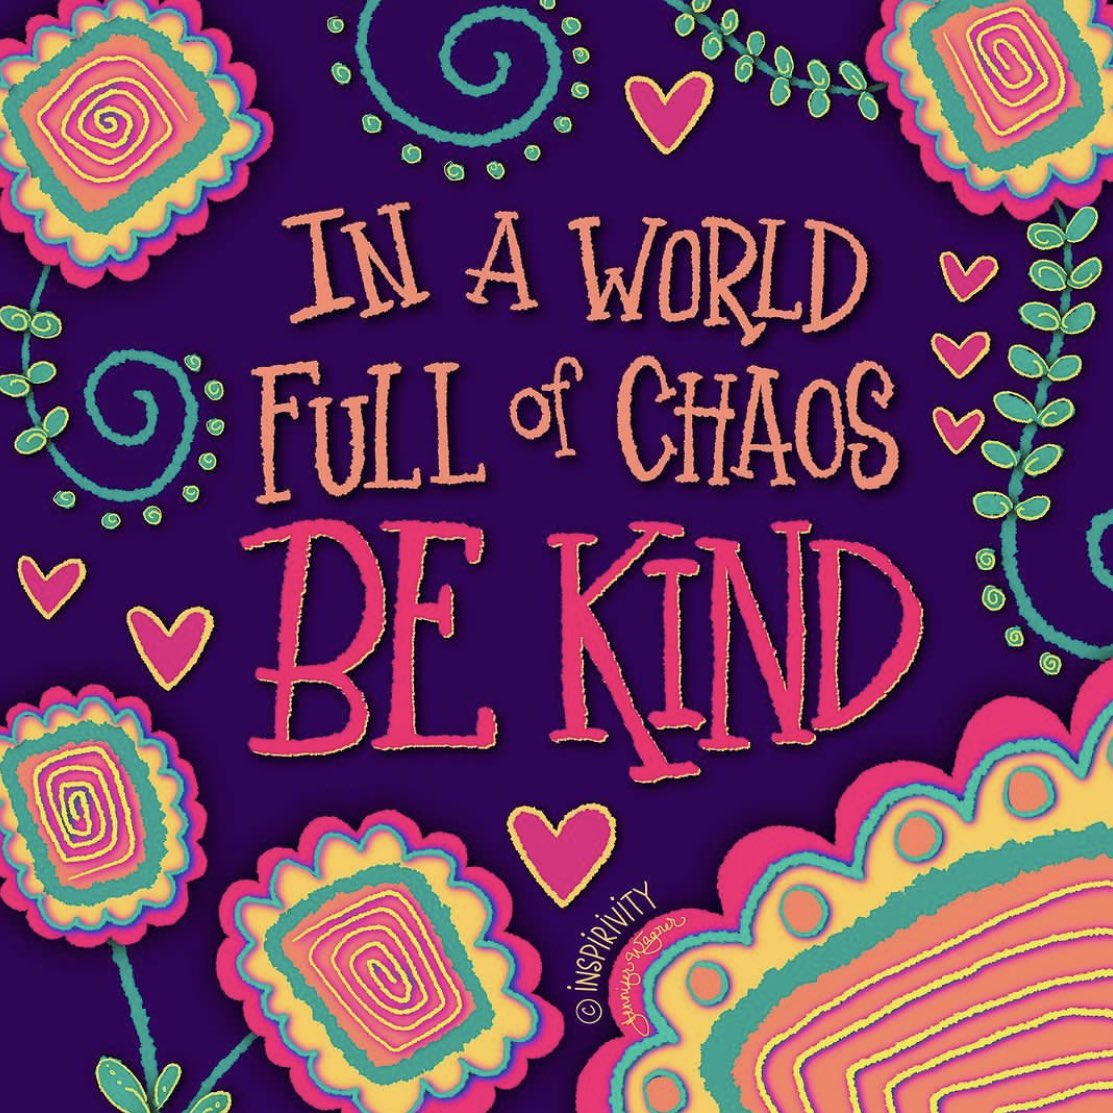 In a world full of chaos, be kind Image: @inspirivity